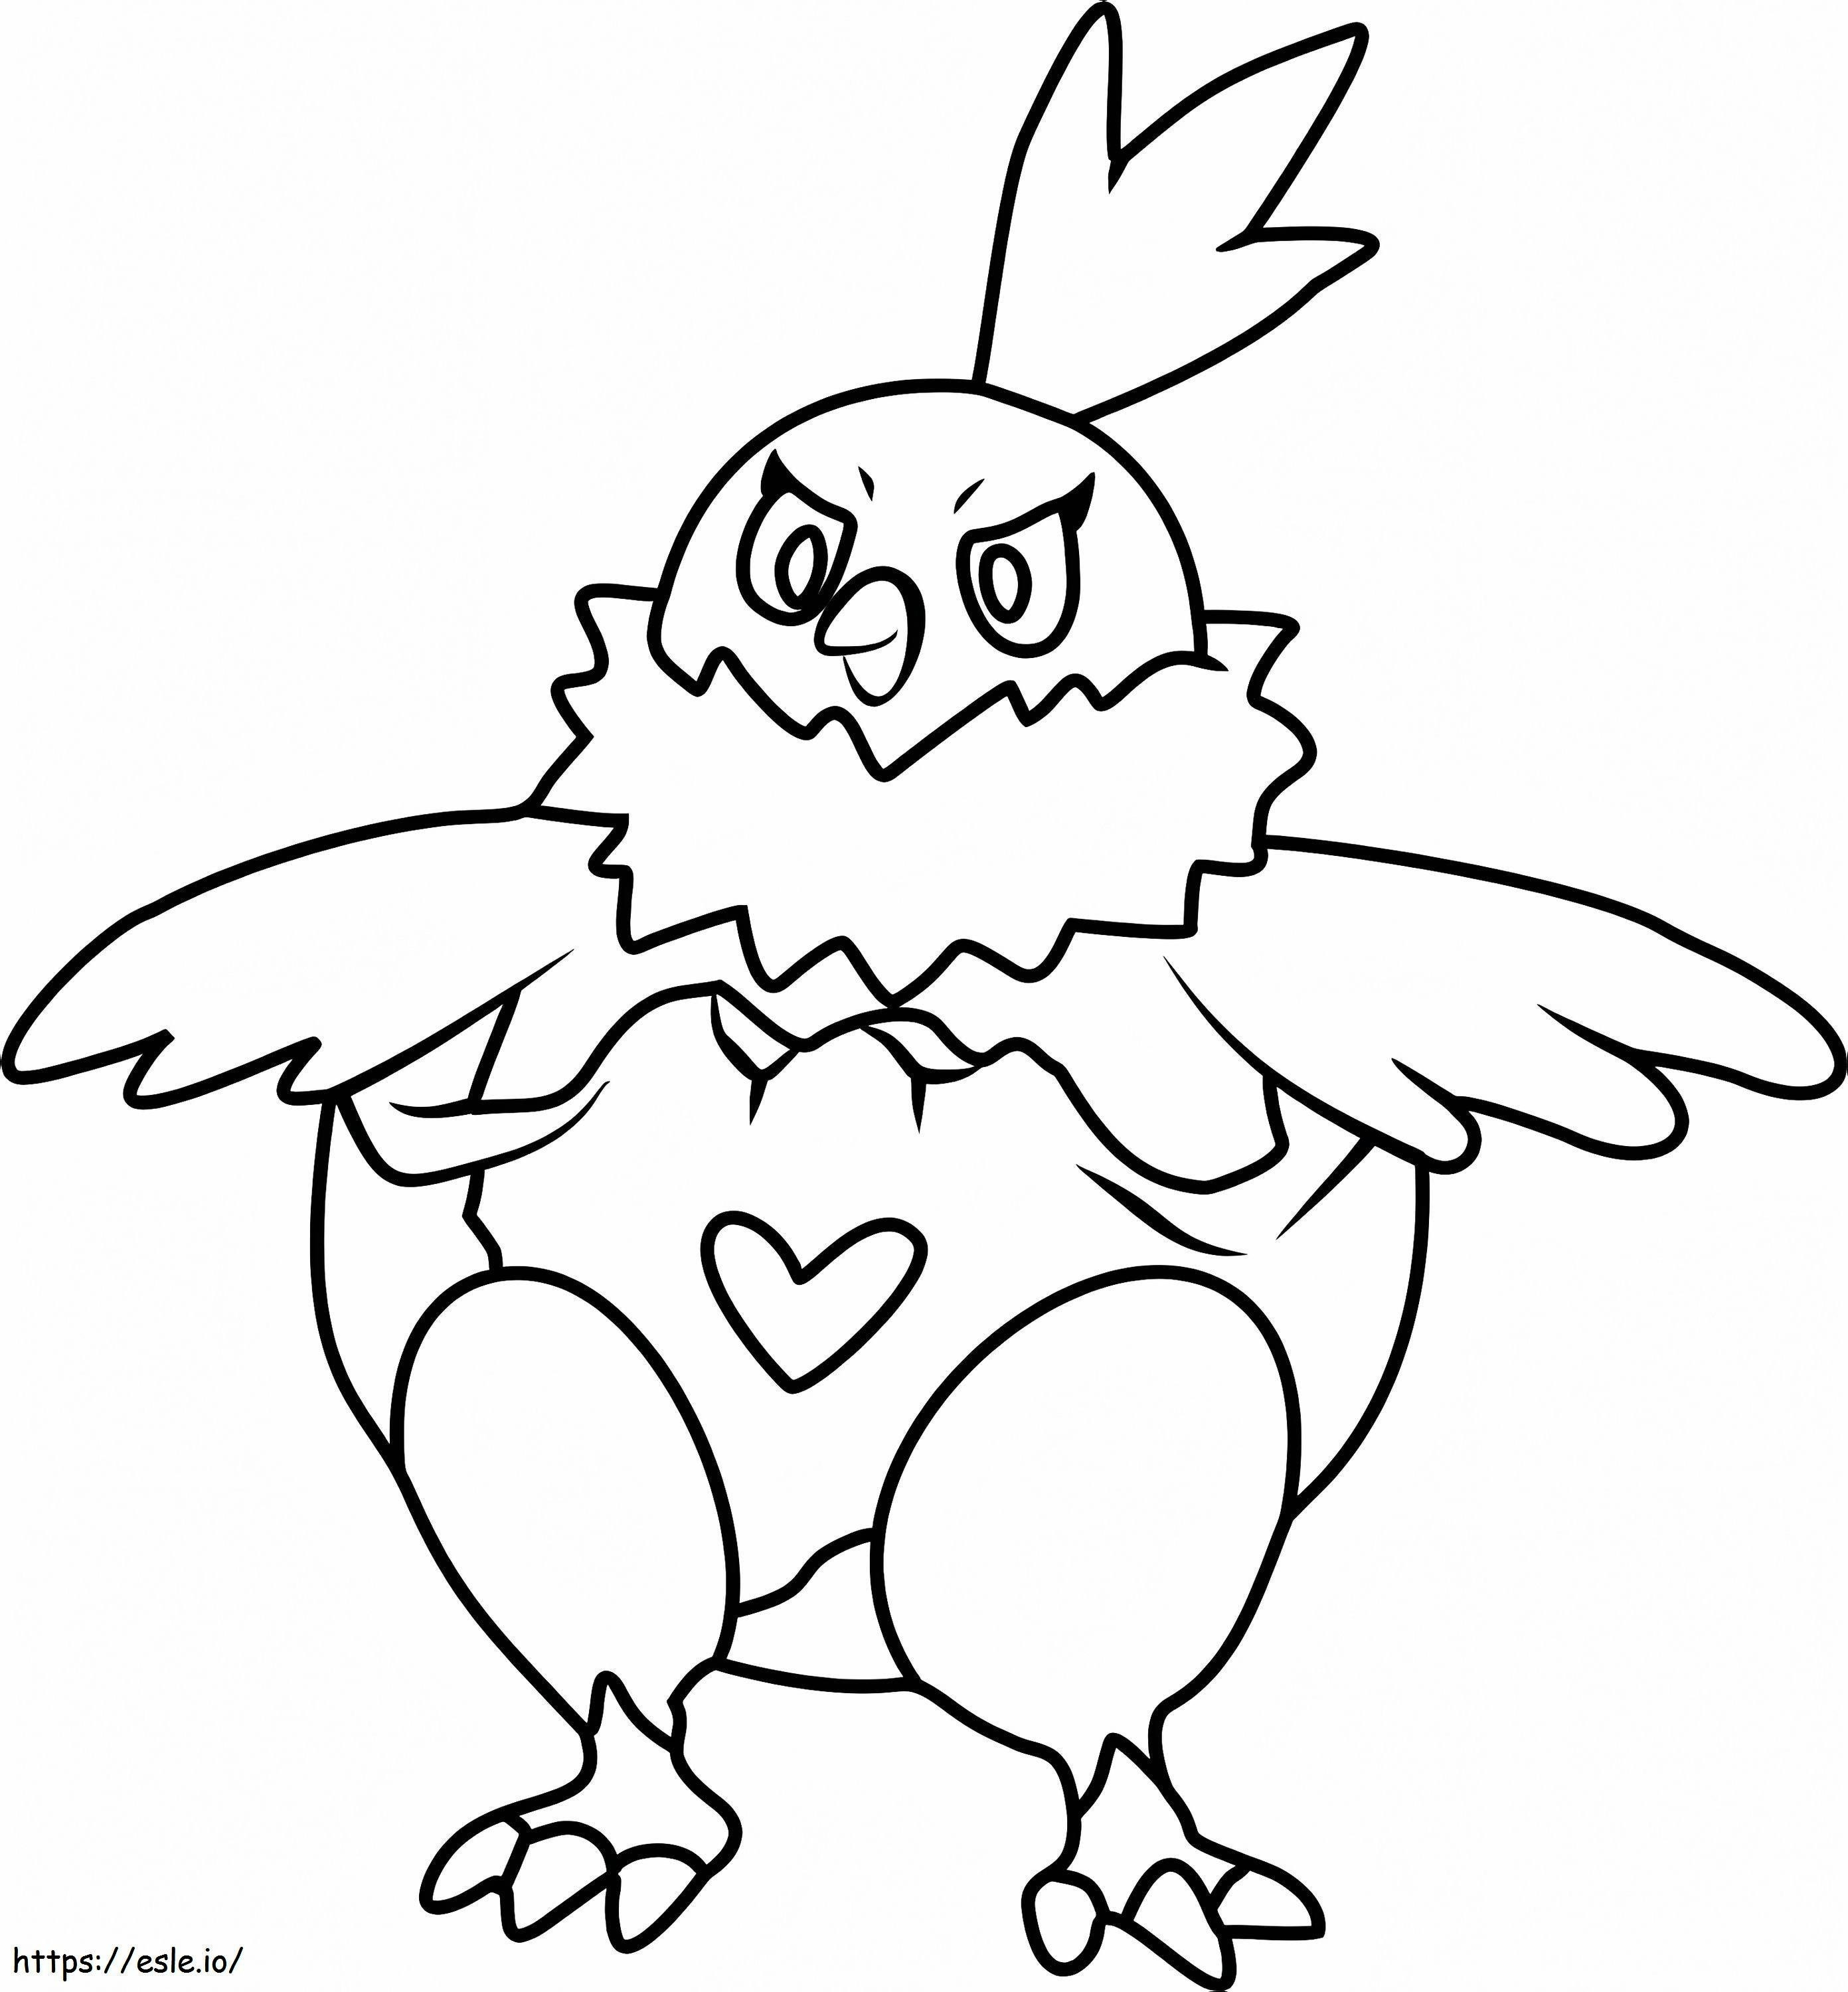 Vullaby Gen 5 Pokemon coloring page